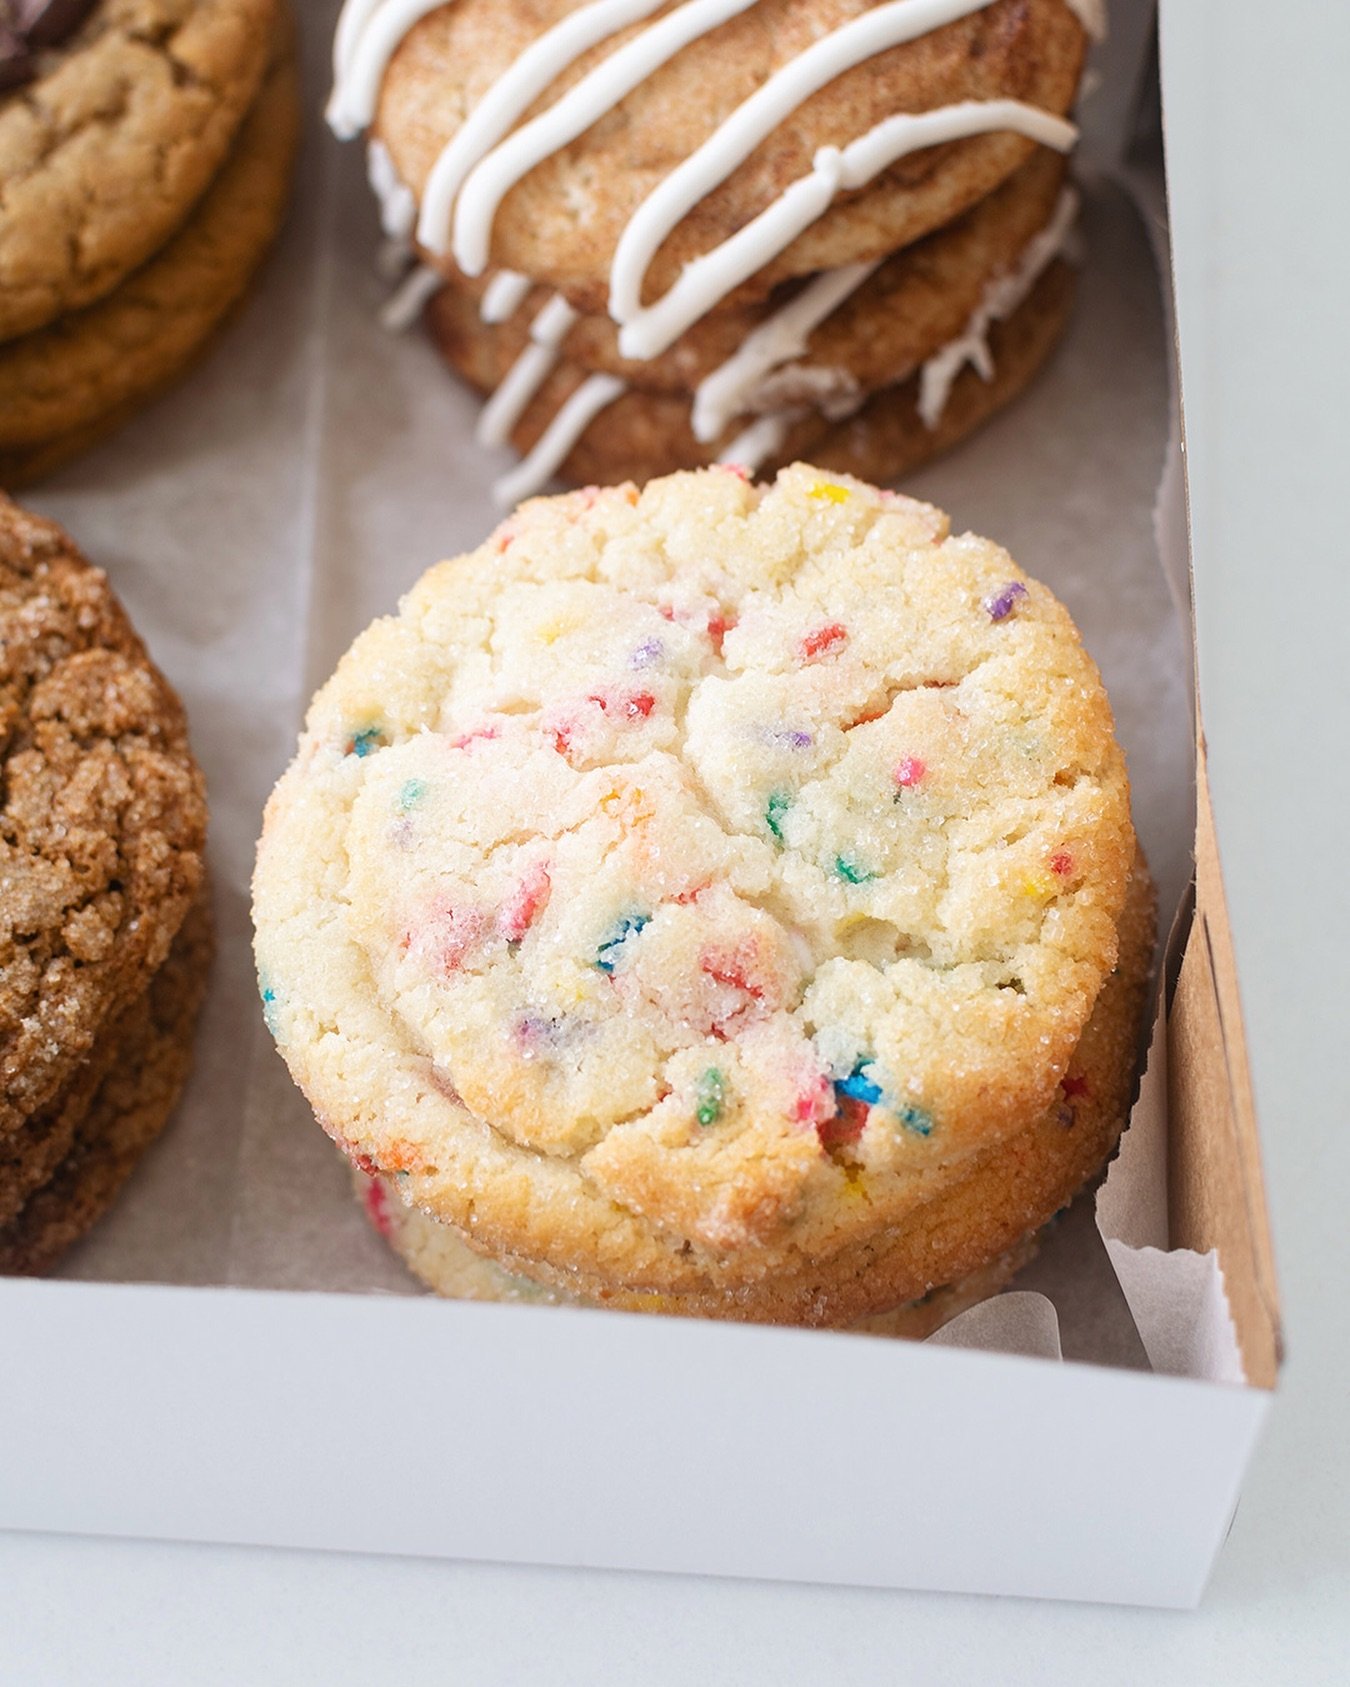 Time flies when you&rsquo;re having Funfetti Cookies ⏱️🎉🍪 Soft, chewy vanilla cookies with rainbow sprinkles, here and @suarezbakeryandbarra till sold out every day.